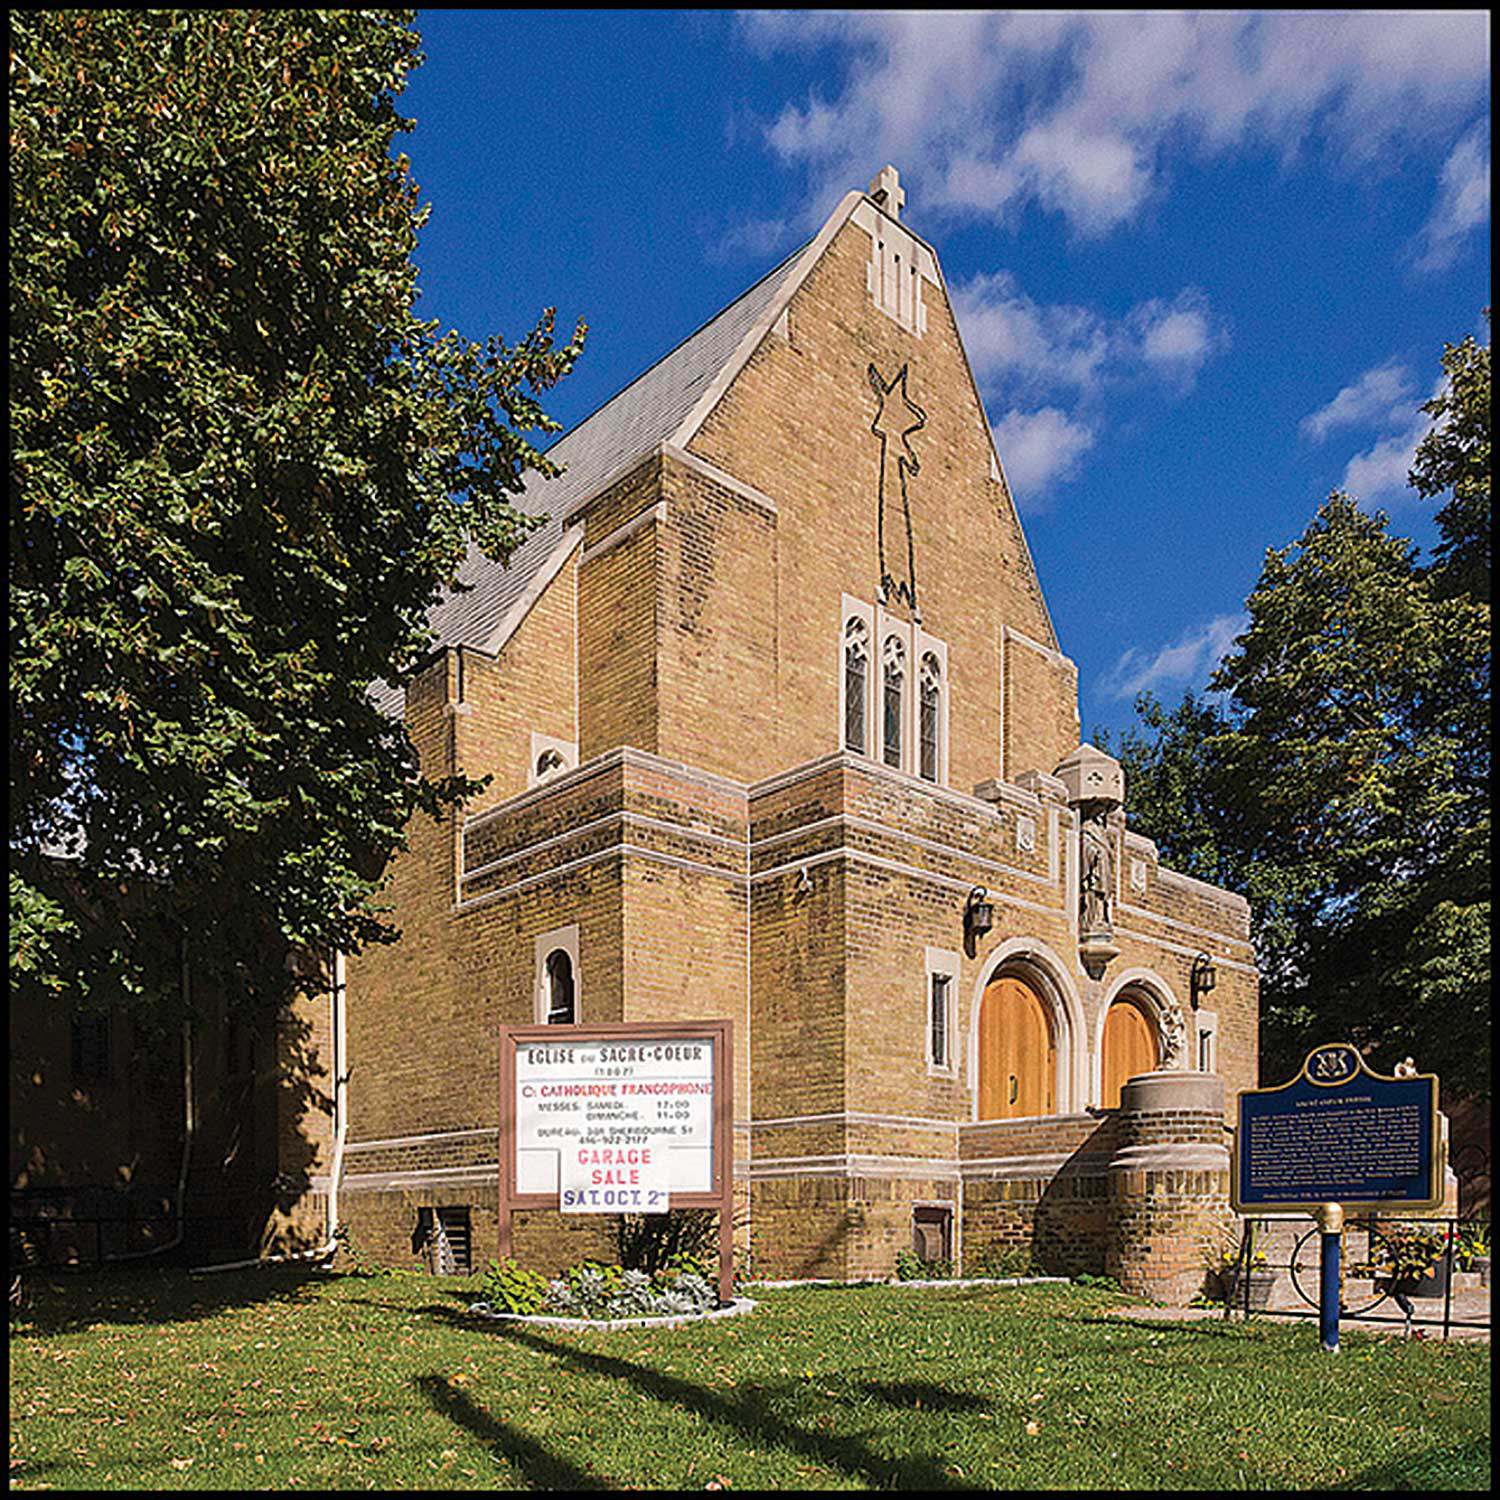 Toronto’s Paroisse du Sacré-Cœur is one of dozens of churches across Ontario that assists in keeping the francophone community a viable part of the entire fabric of Ontario.